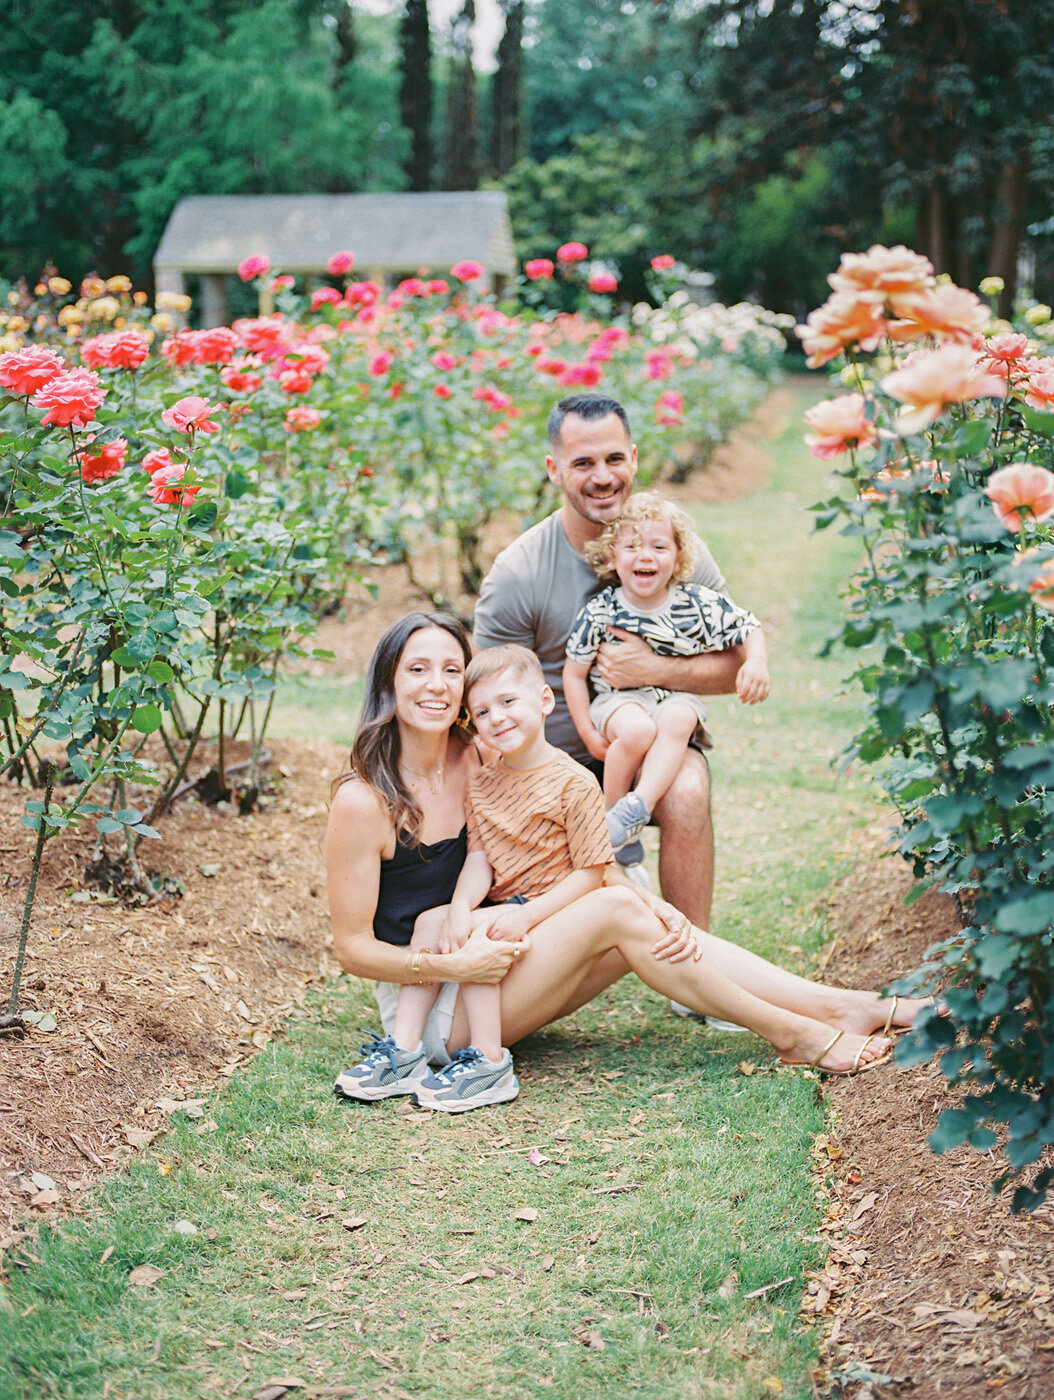 Raleigh Family Photographer | Jessica Agee Photography - 012